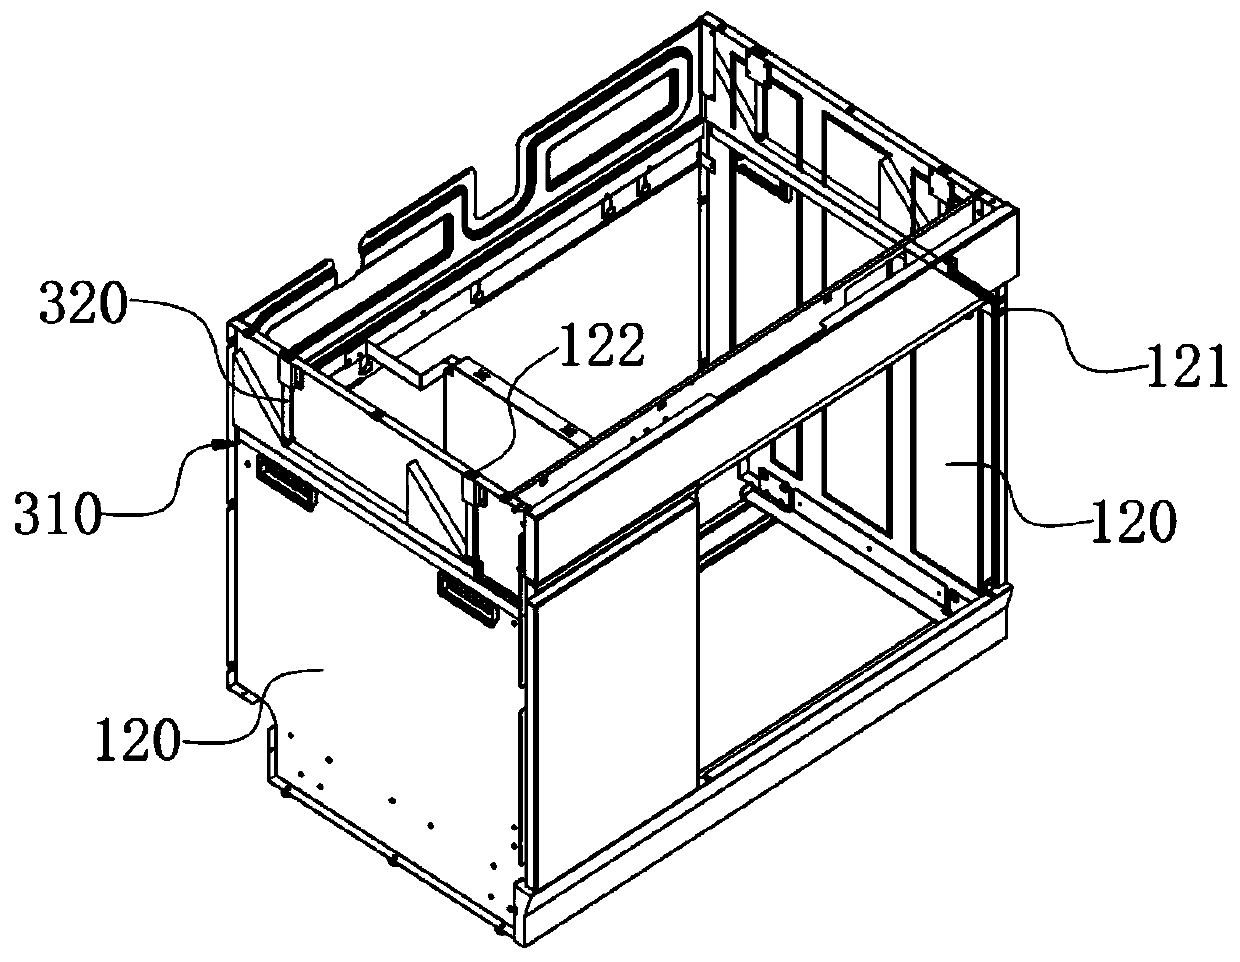 Under-counter sink assembly and integrated sink